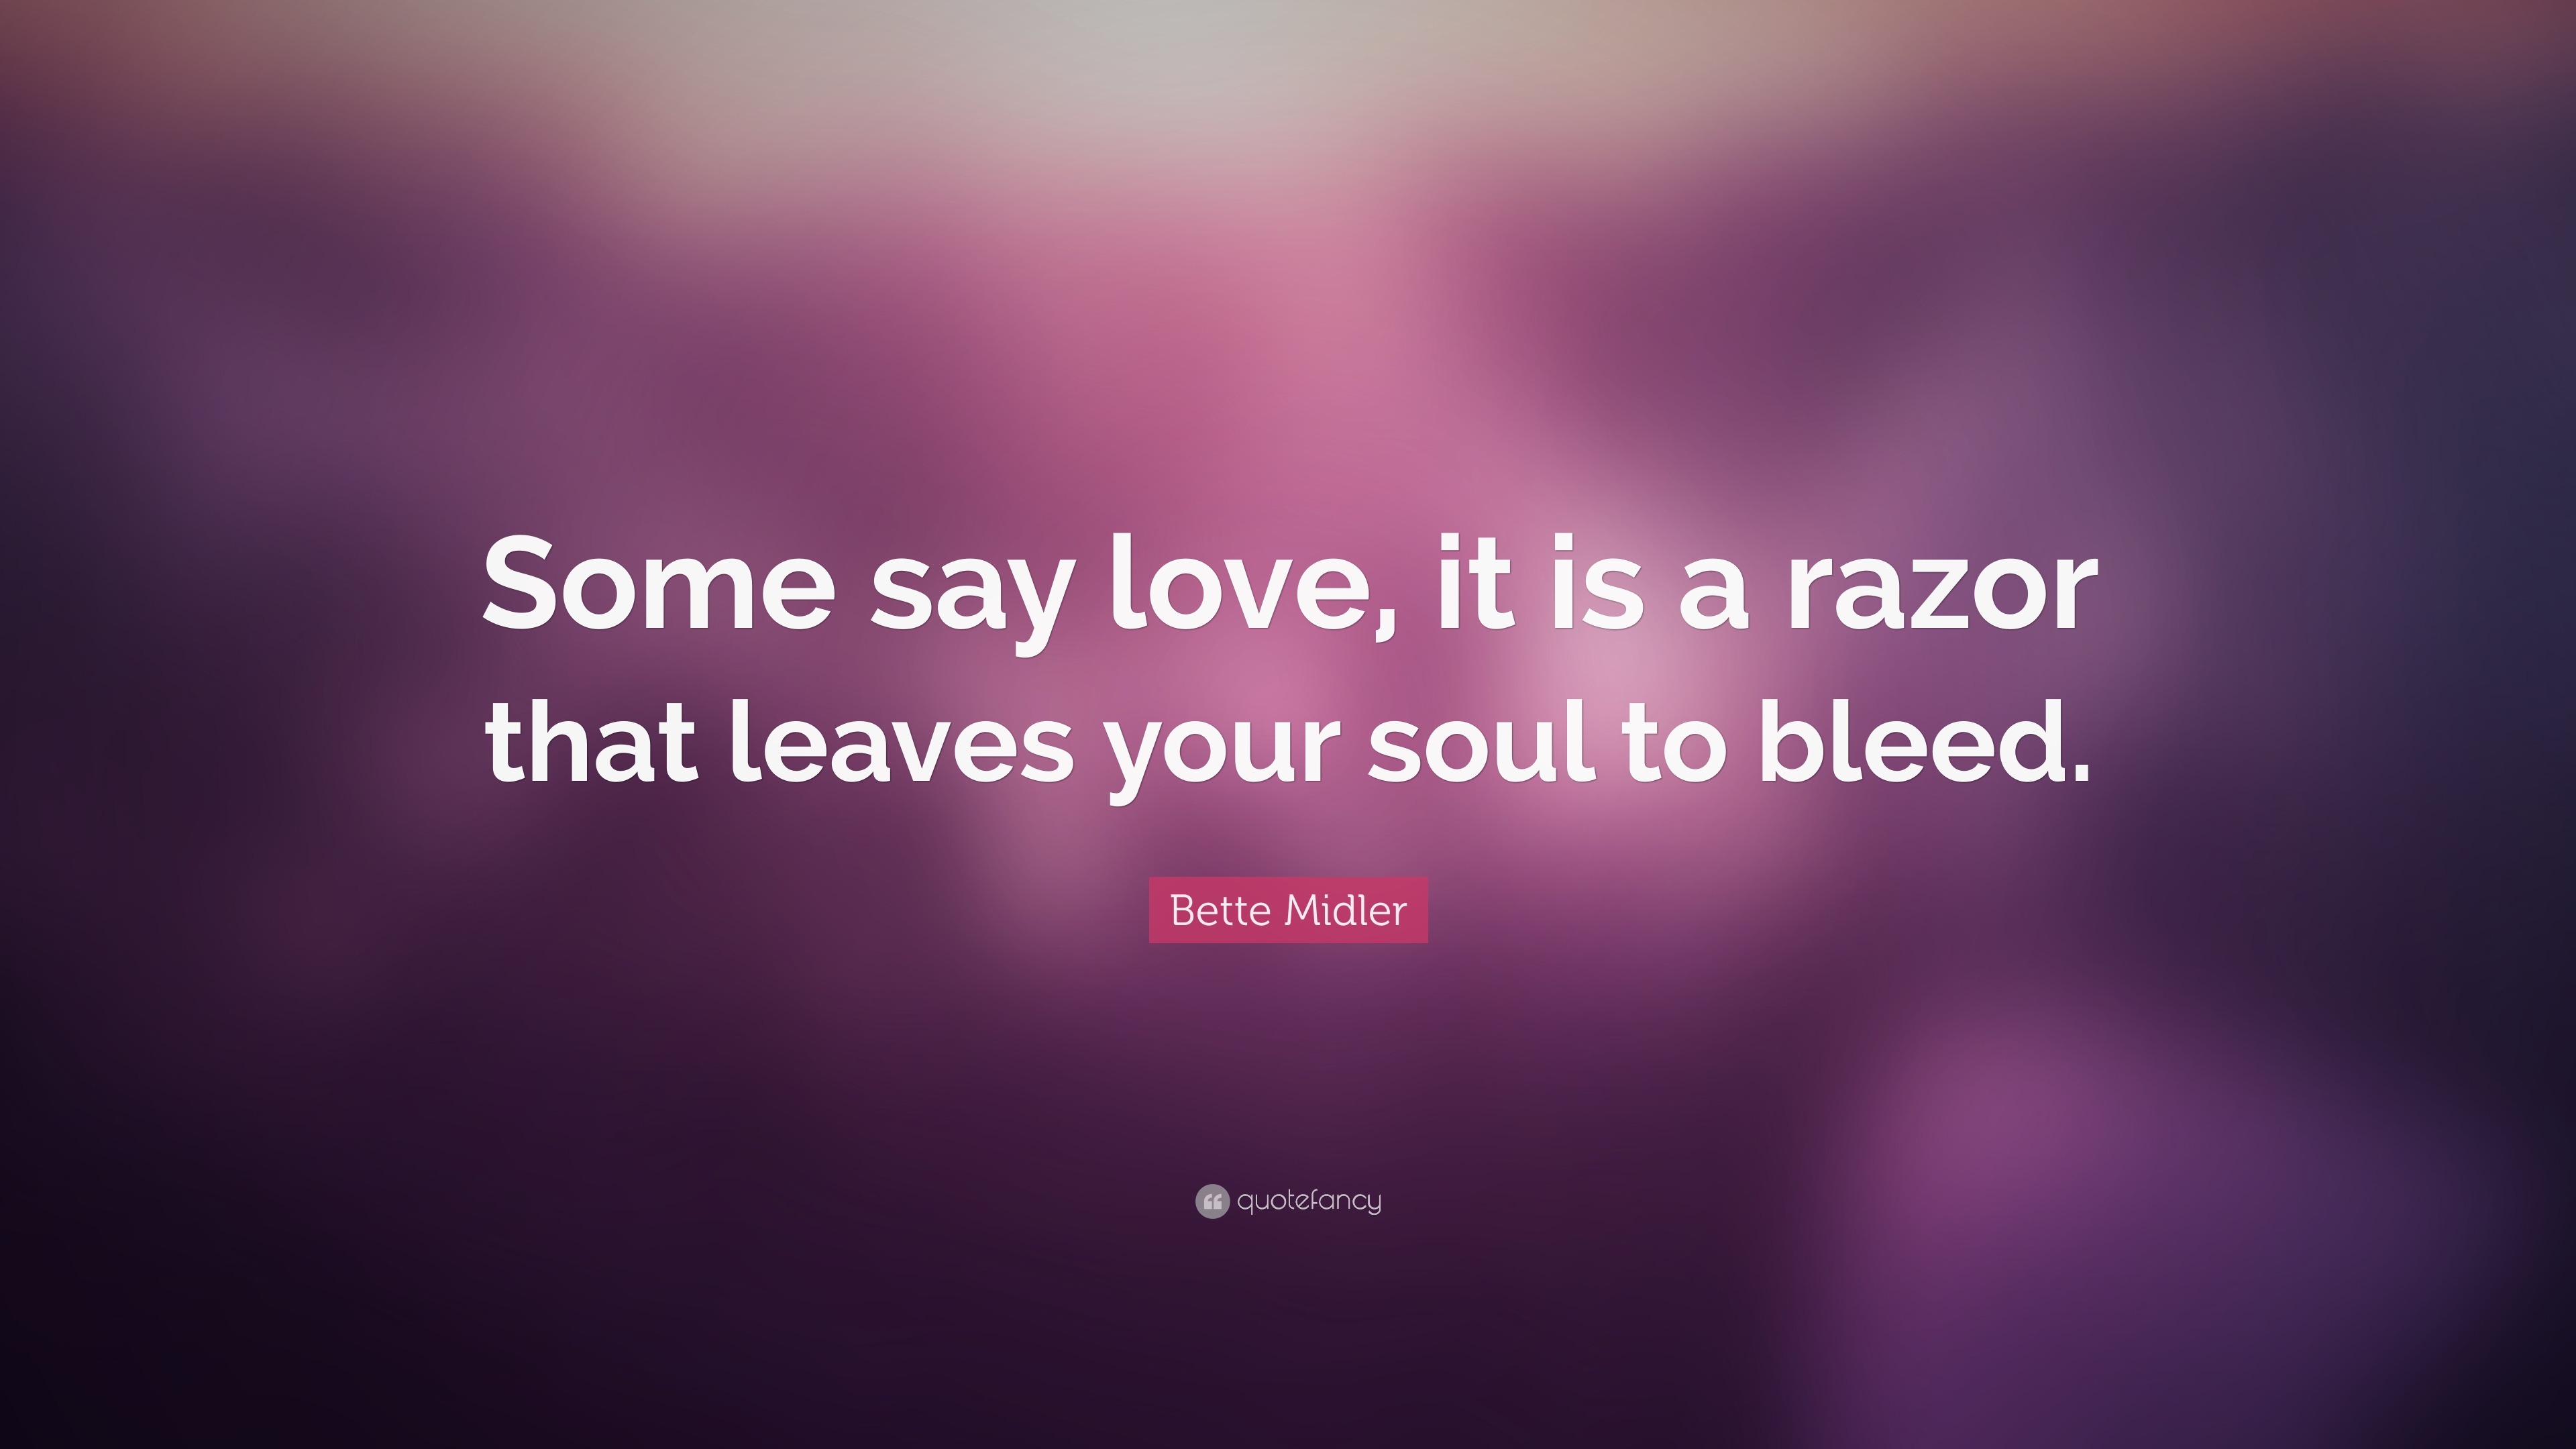 Broken Heart Quotes “Some say love it is a razor that leaves your